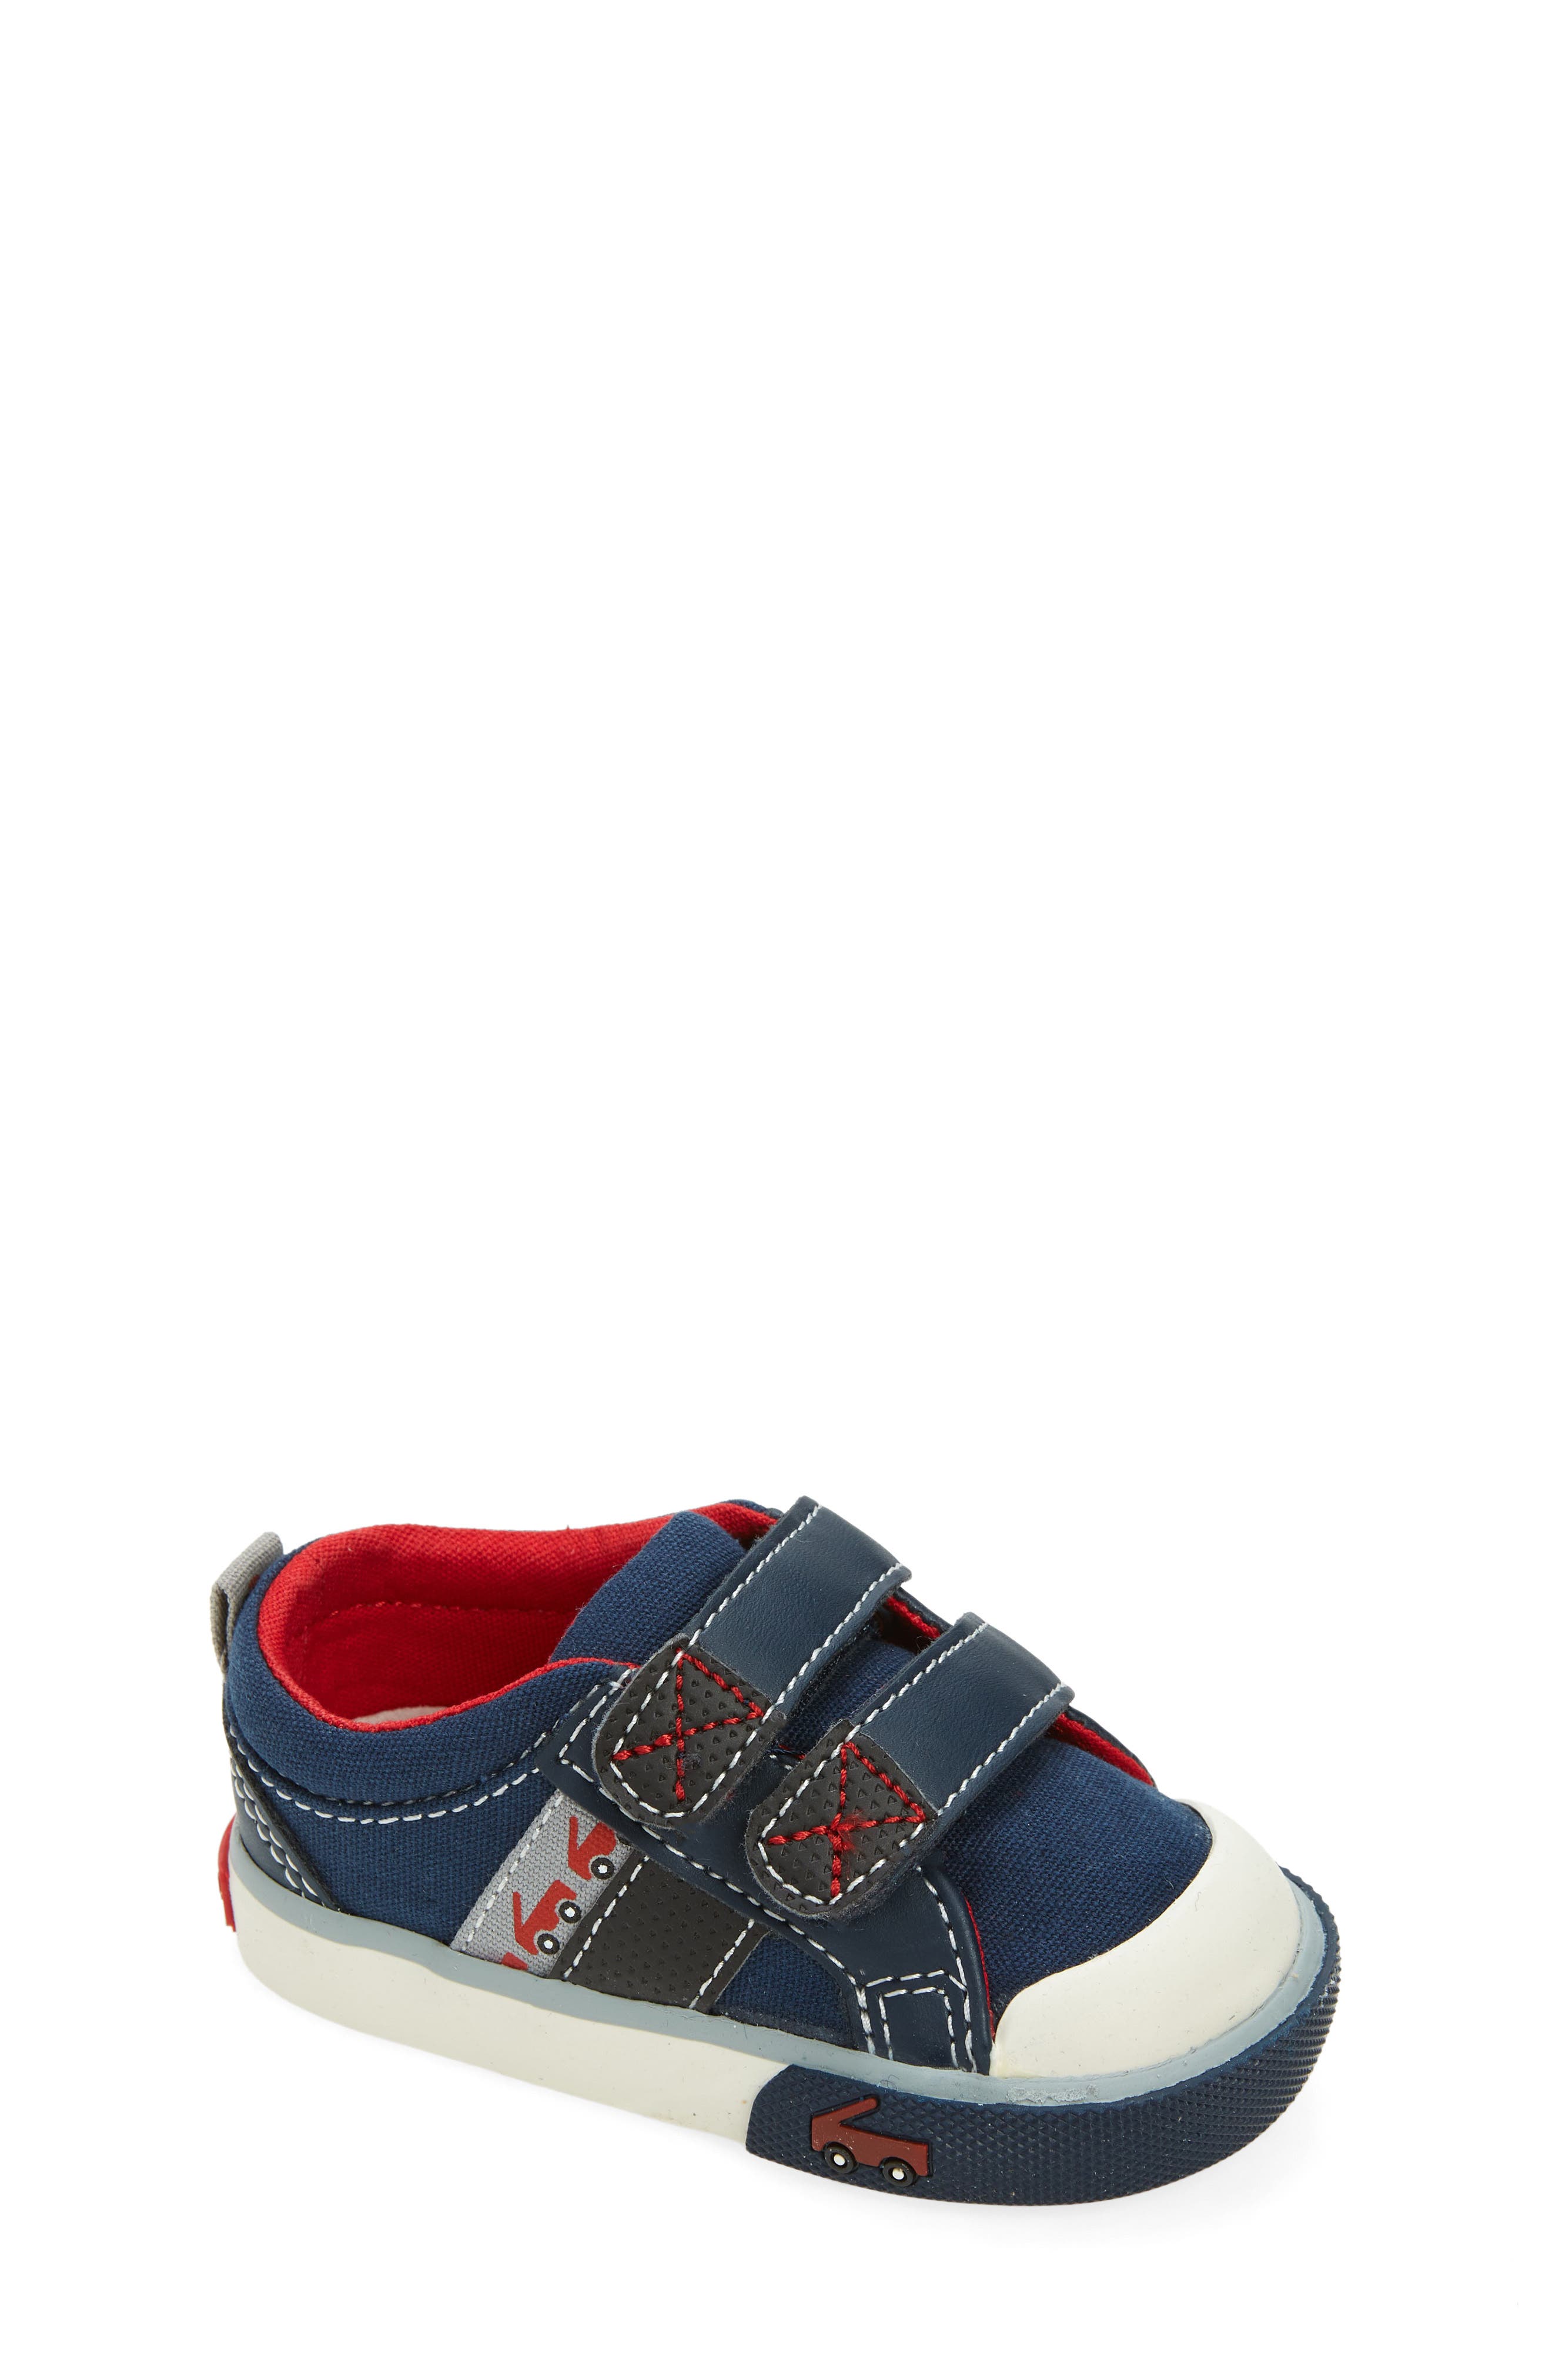 Ryder Sneakers for Infants See Kai Run 